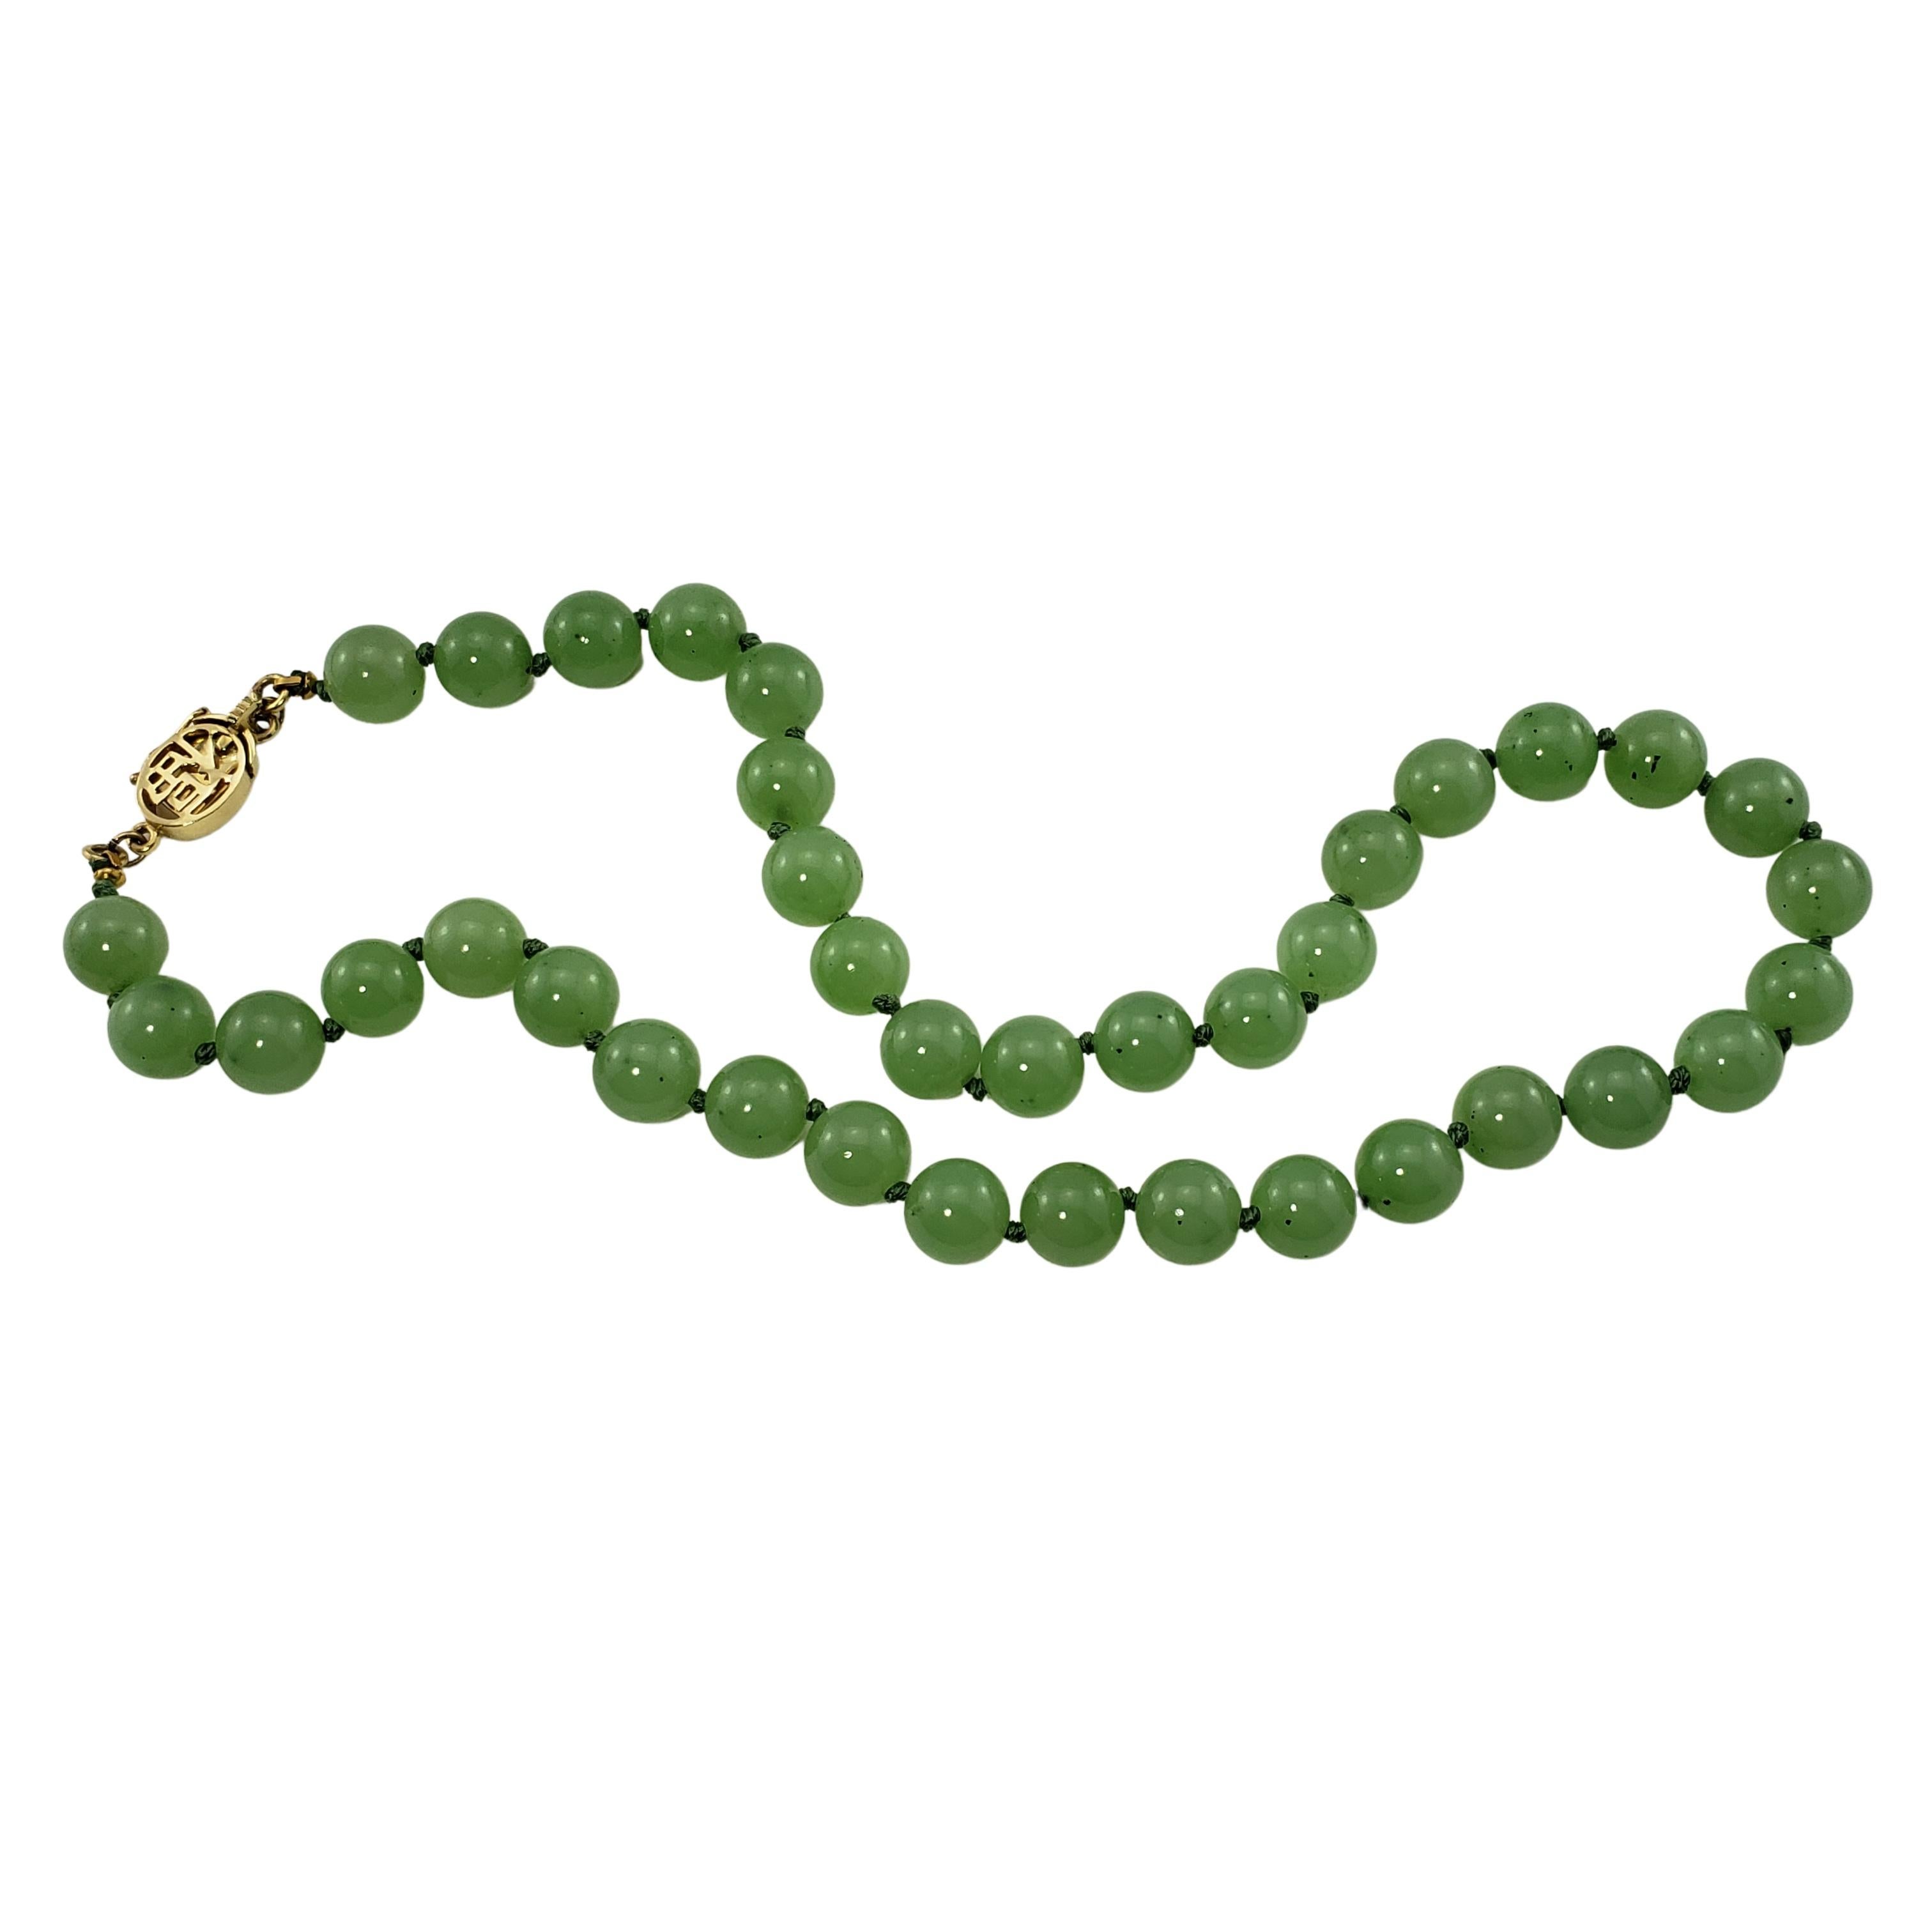 Vintage 14 Karat Yellow Gold Green Jade Bead Necklace-

This stunning necklace features 37 green jade beads (10 mm each) with a classic 14K gold clasp.  

Size:  17.75 inches 

Weight:  39.3 dwt. /  61.2 gr.

Hallmark:  14K

Very good condition,